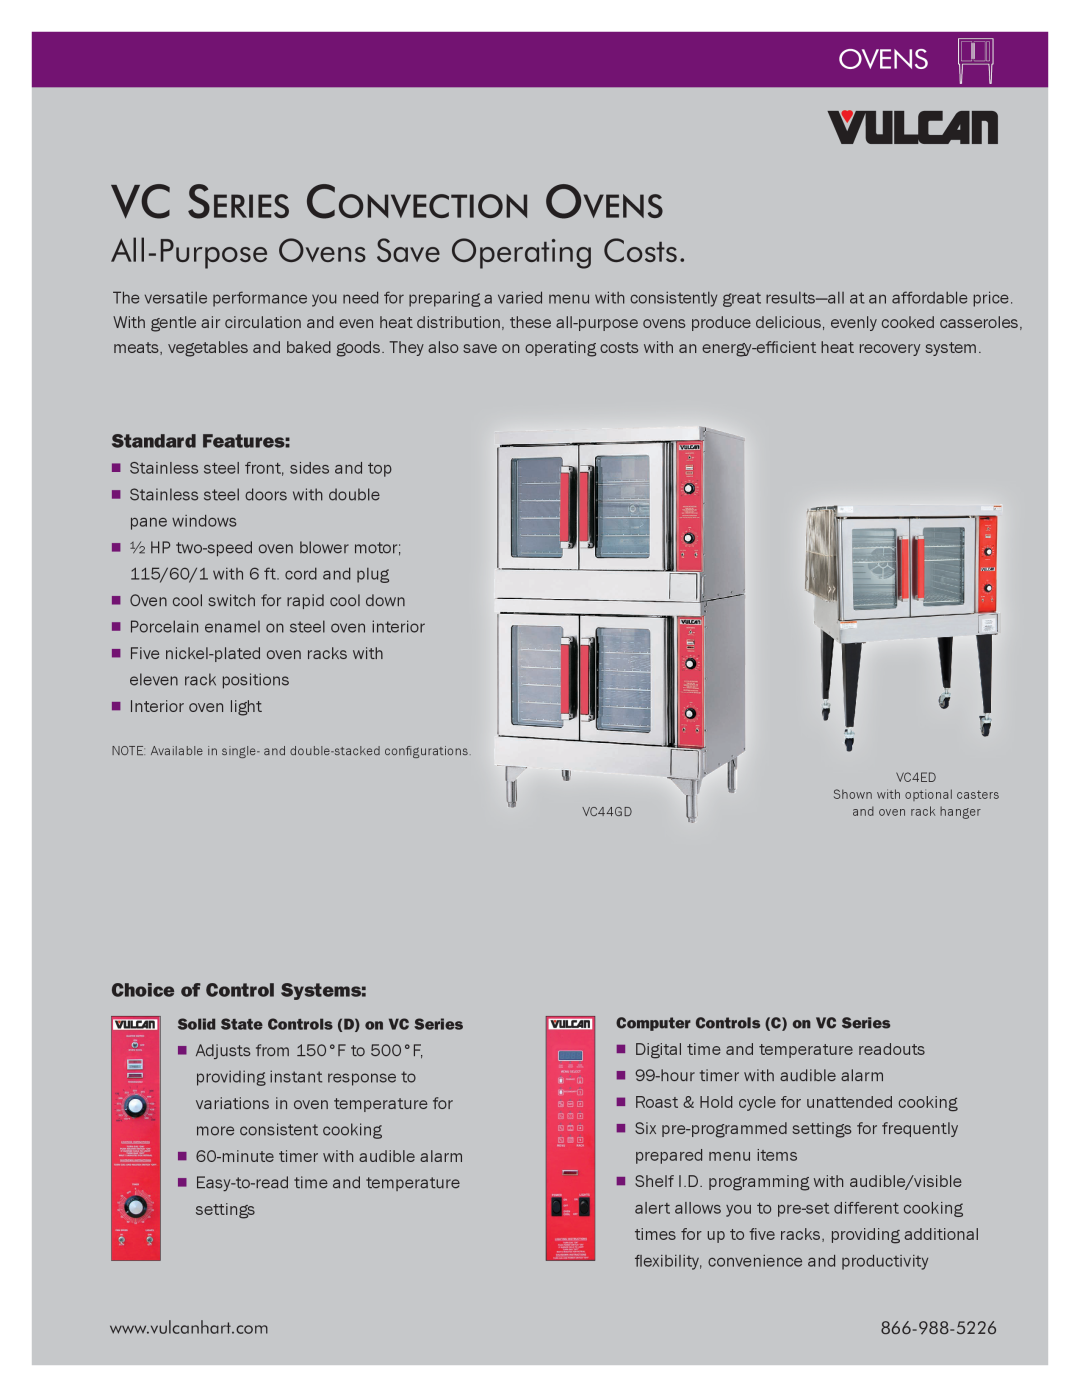 Vulcan-Hart VC44GD manual VC Series Convection Ovens, All-PurposeOvens Save Operating Costs, Standard Features 